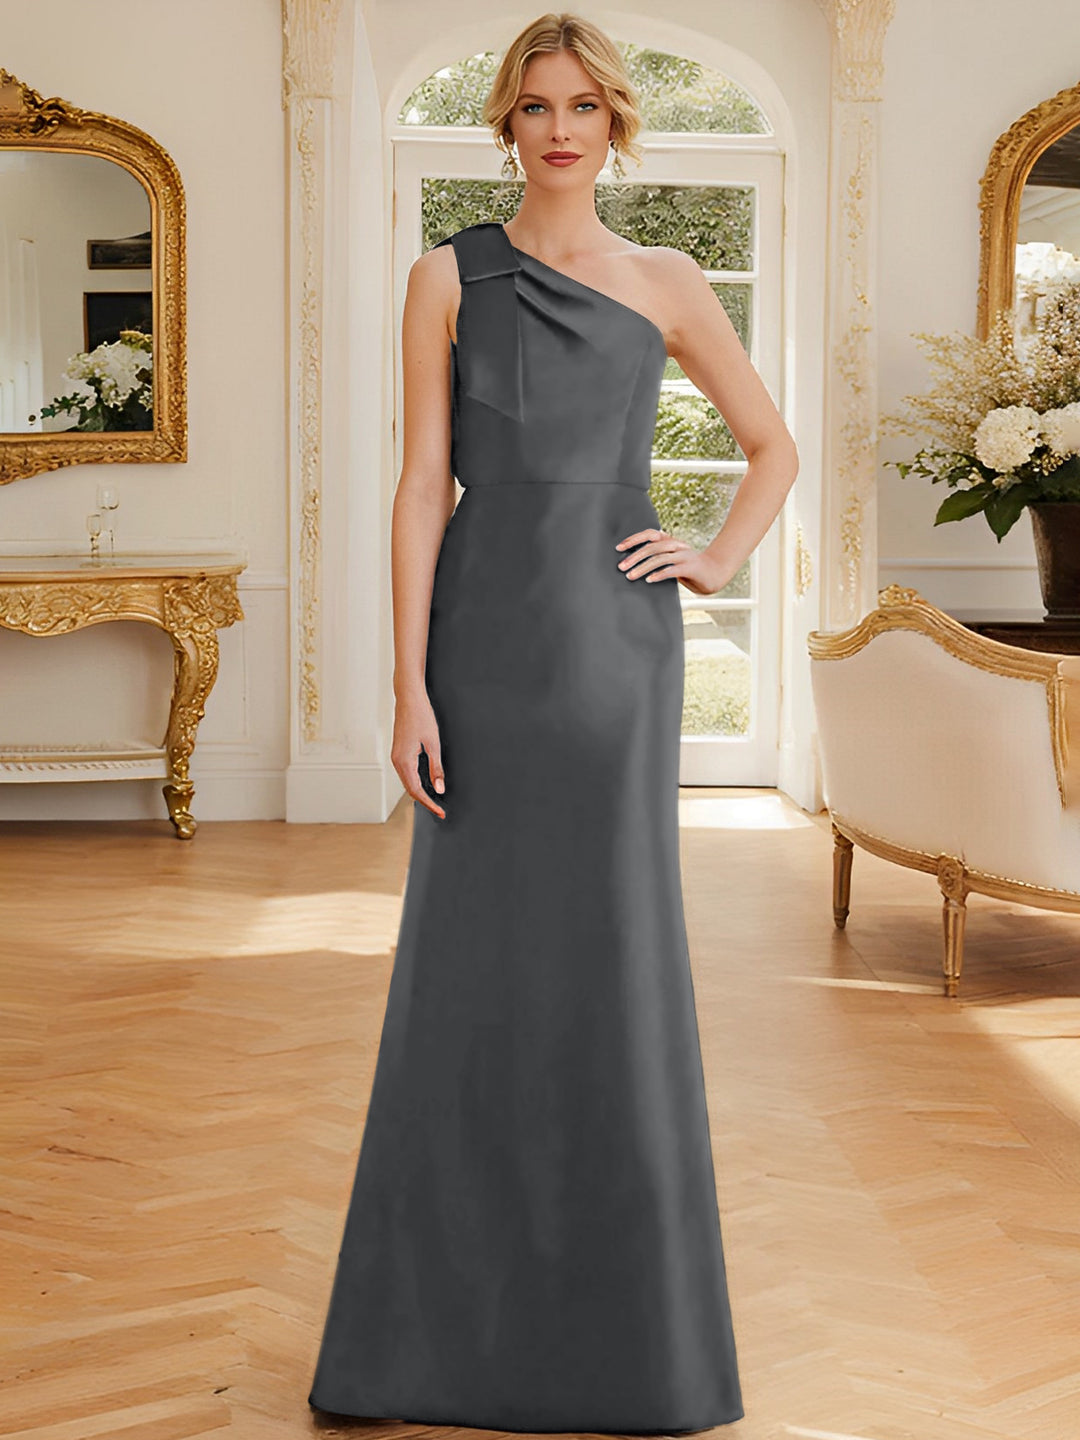 Sheath/Column One-Shoulder Sleeveless Satin Mother of the Bride Dresses with Bowknot